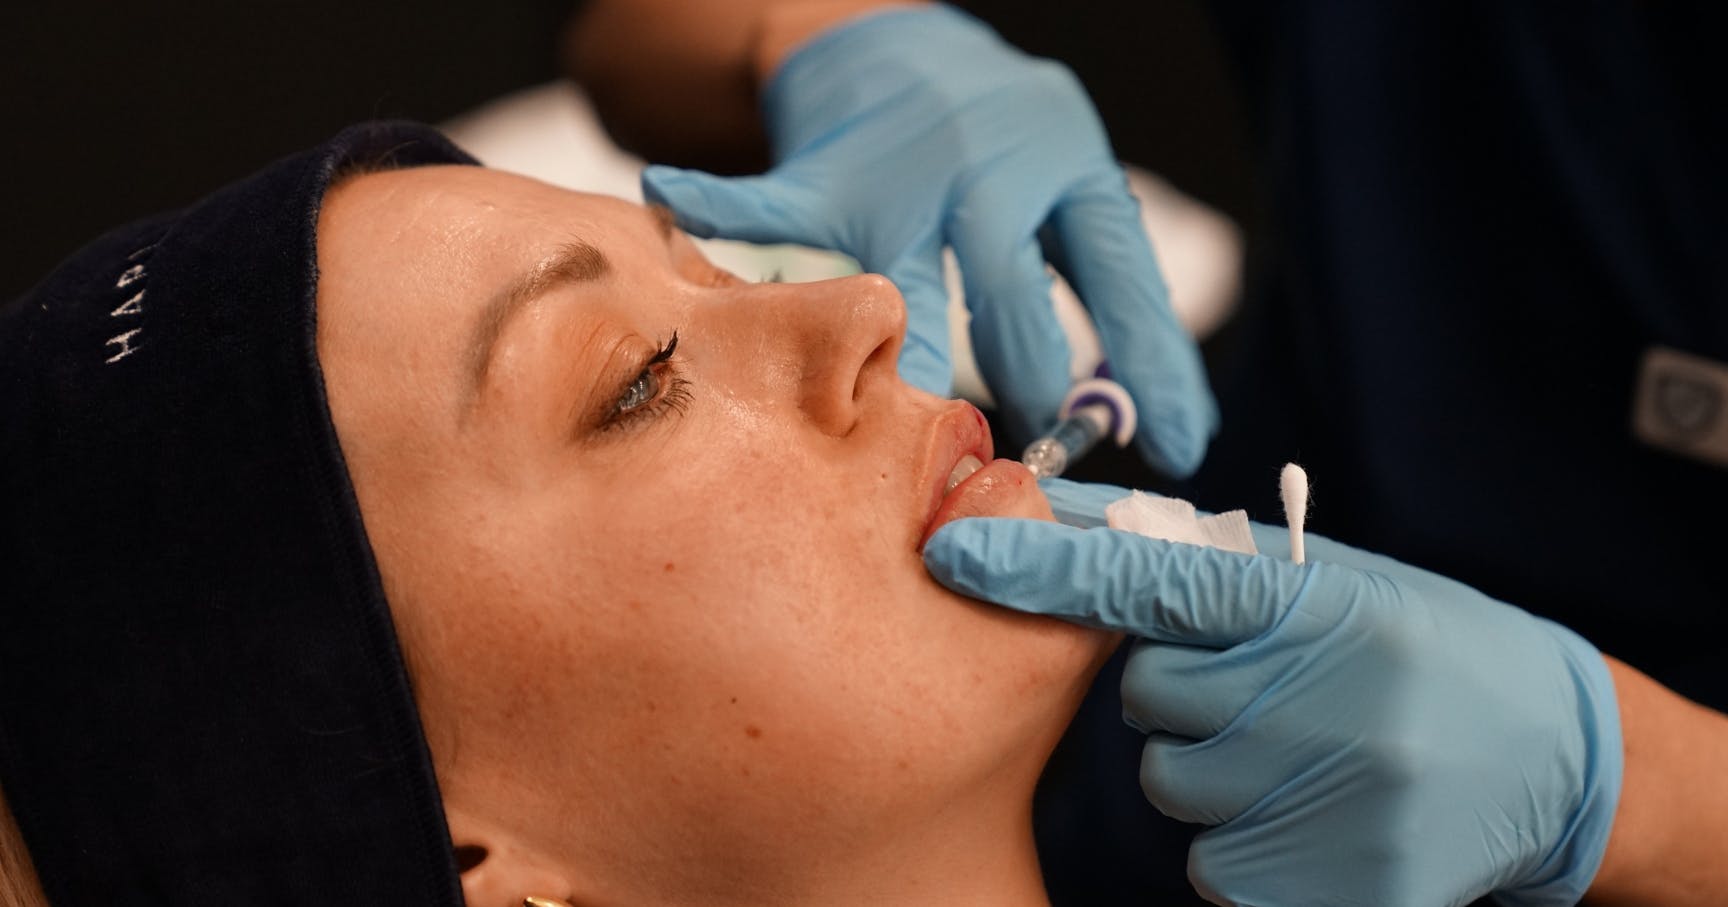 How to Produce Safe, Natural-Looking Lip Filler Results - Harley Academy 